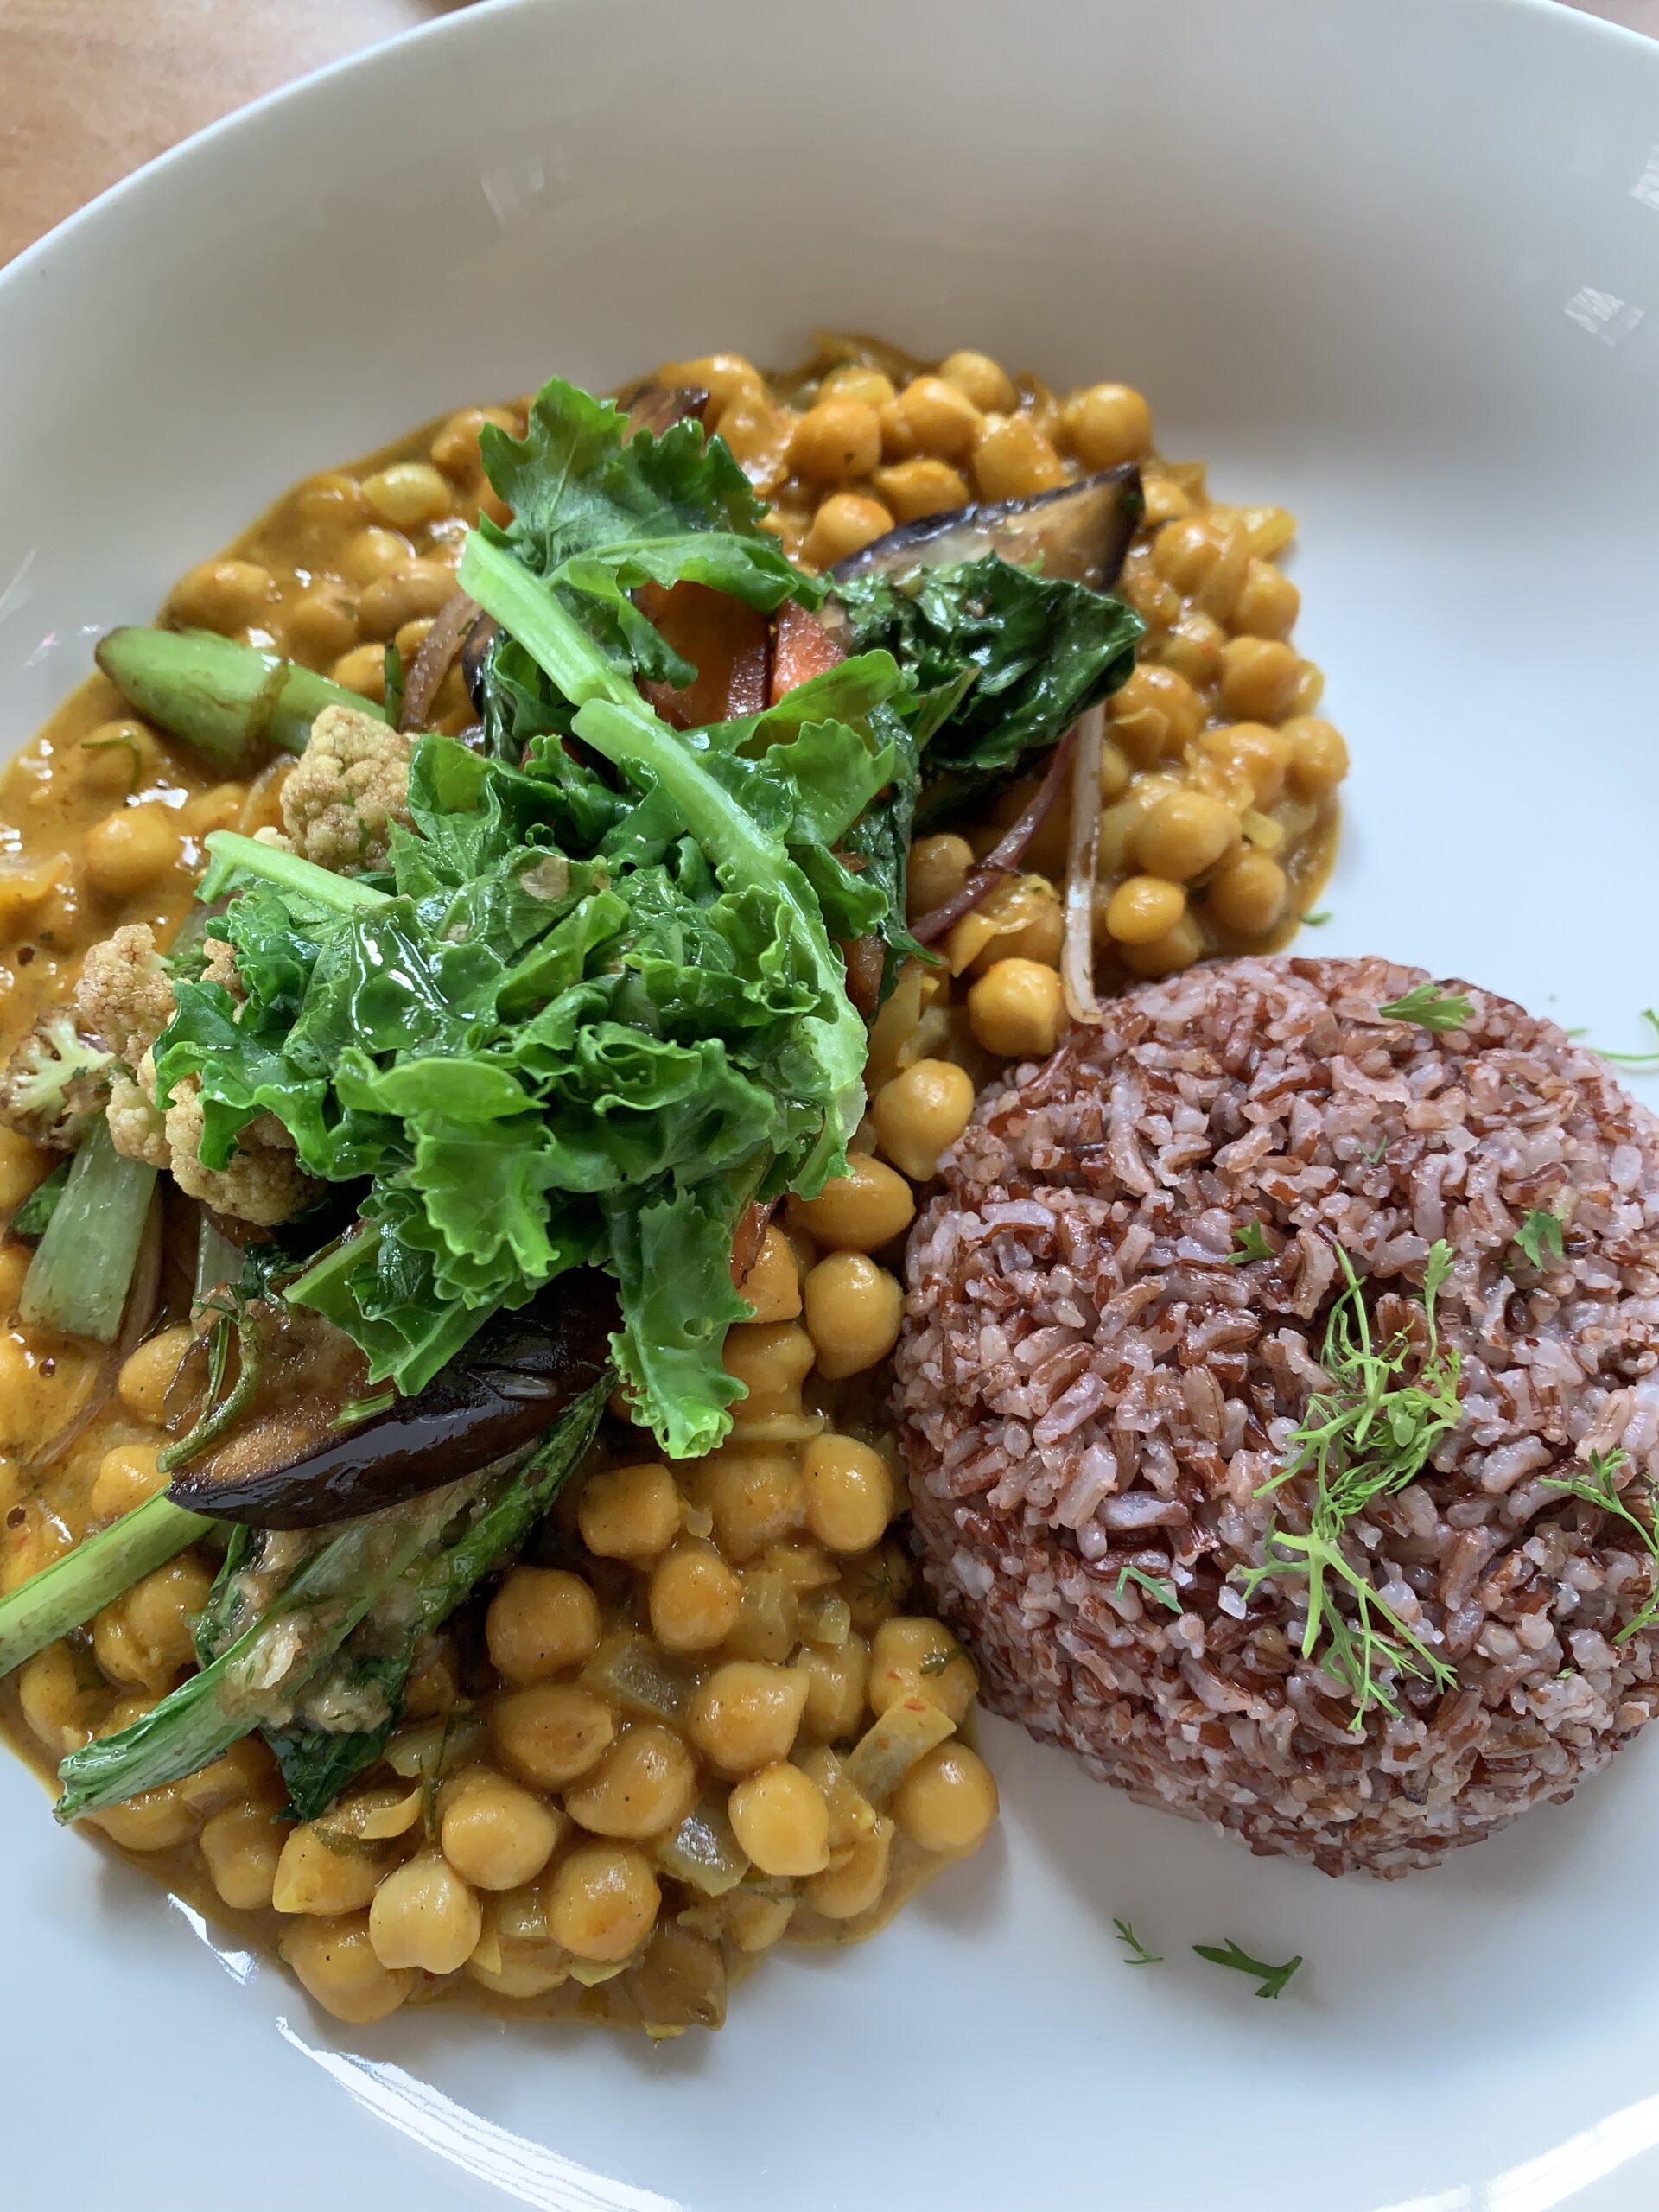 A plate of vegan chickpea curry with a side of brown rice from the Tatale Restaurant 